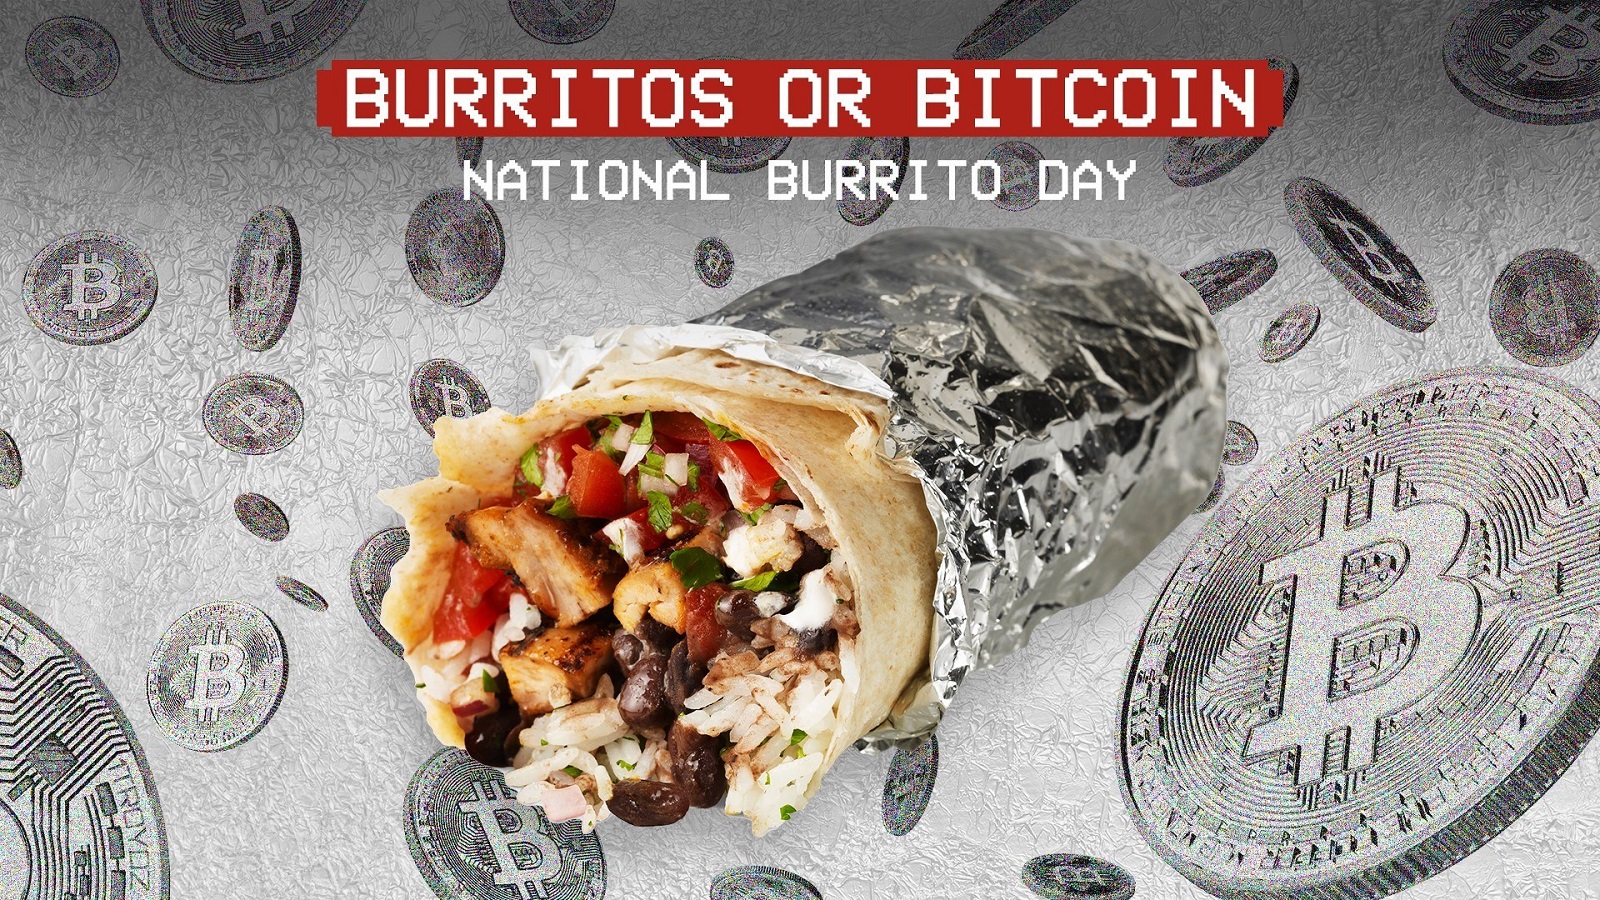 Chipotle is giving away burritos and bitcoin for National Burrito Day BGR